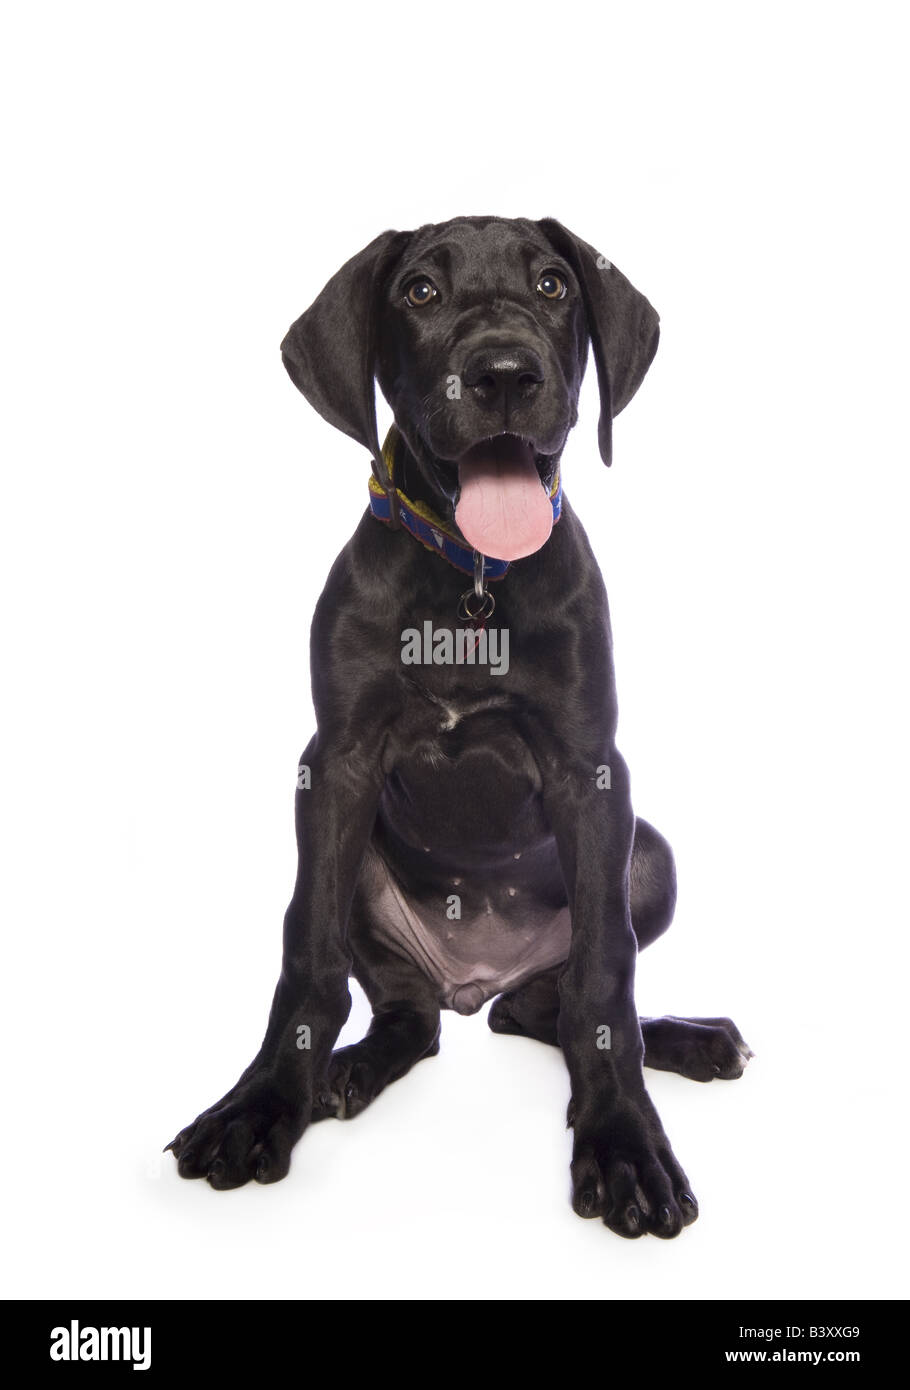 Adorable black Great Dane puppy isolated on white background Stock Photo